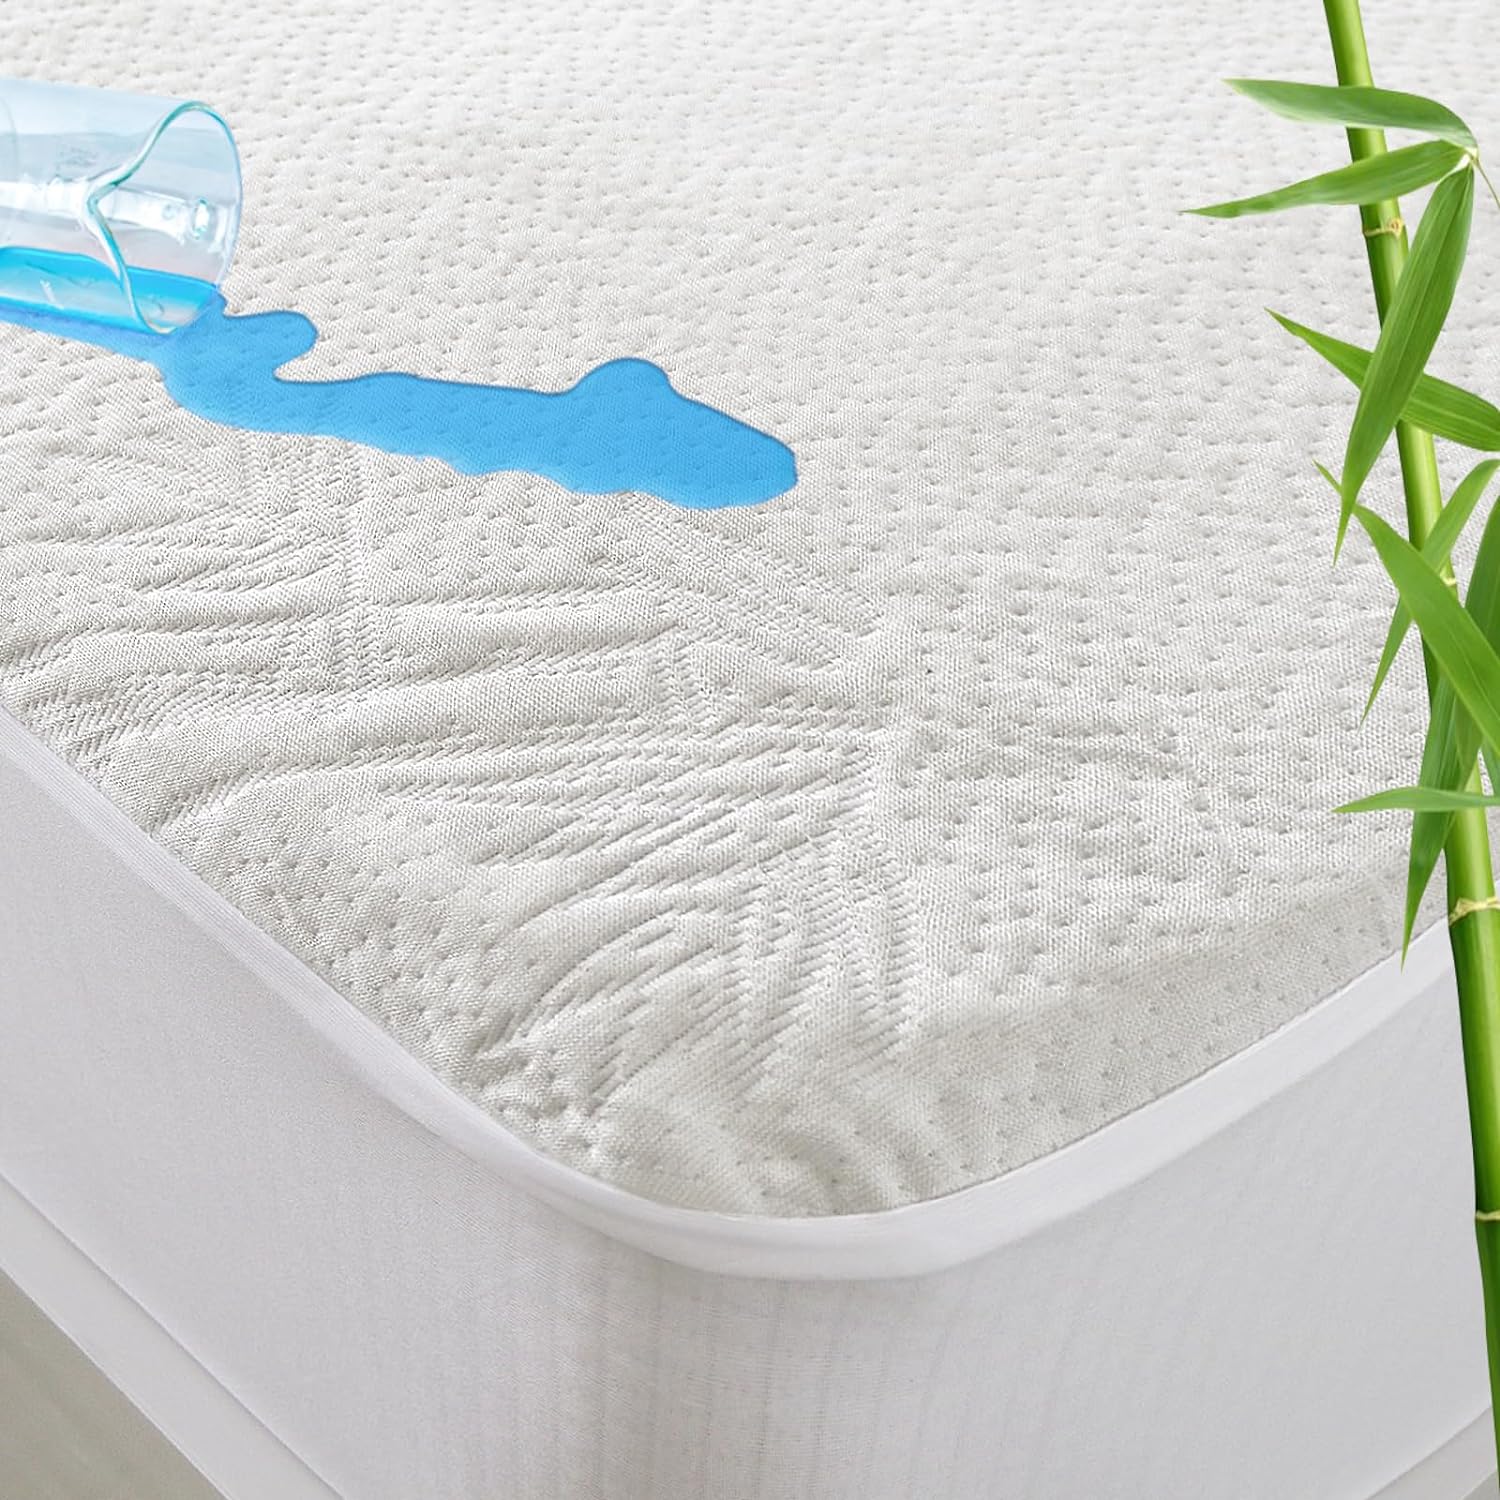 Waterproof Bamboo Mattress Protector, Cooling 3D Air Fabric, Noiseless & Breathable Mattress Pad Cover Fitted Up to 14" Depth - Biloban Online Store